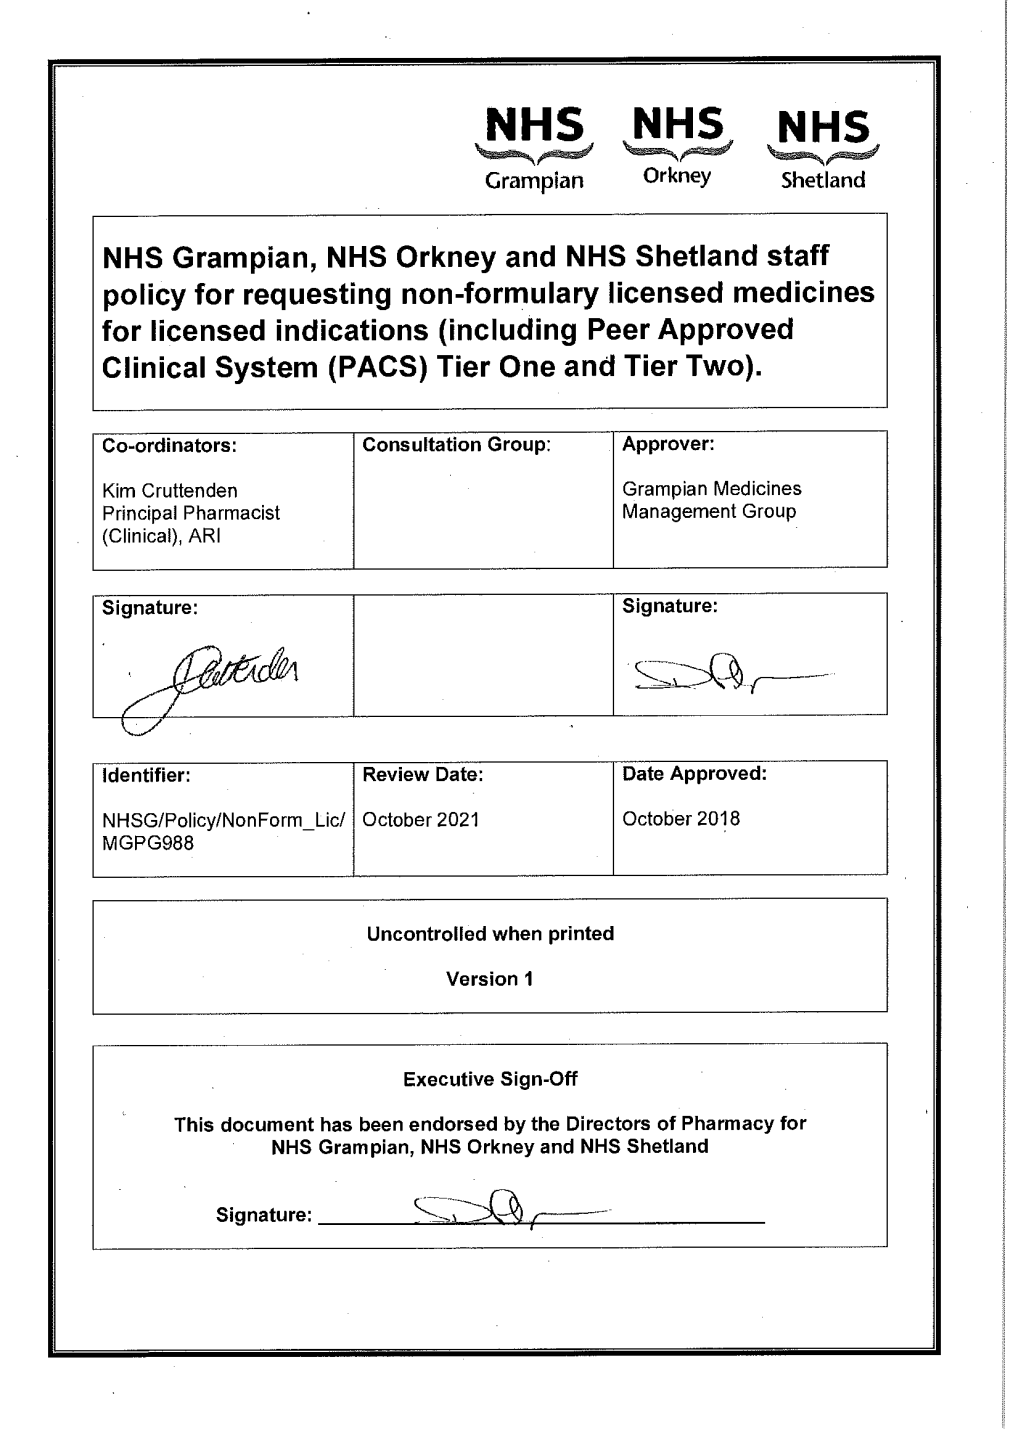 NHS Grampian, NHS Orkney and NHS Shetland Staff Policy For